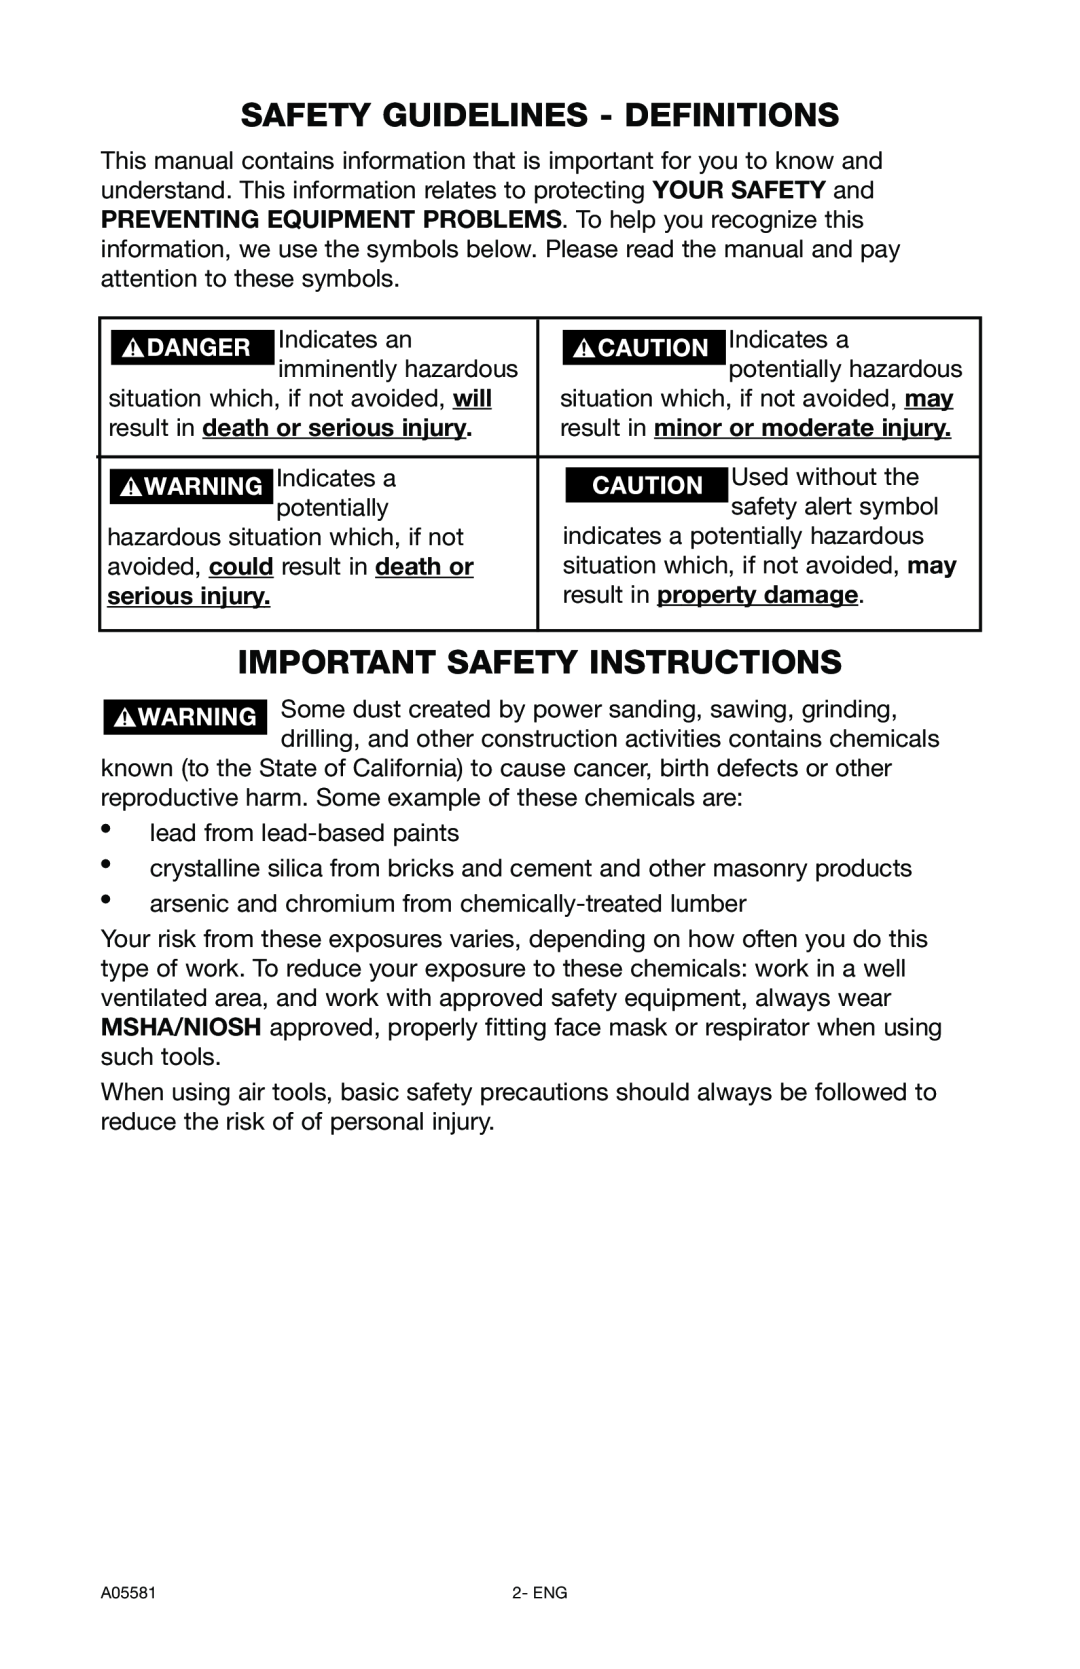 Delta A05581, CP201 Safety Guidelines - Definitions, Important Safety Instructions, result in death or serious injury 